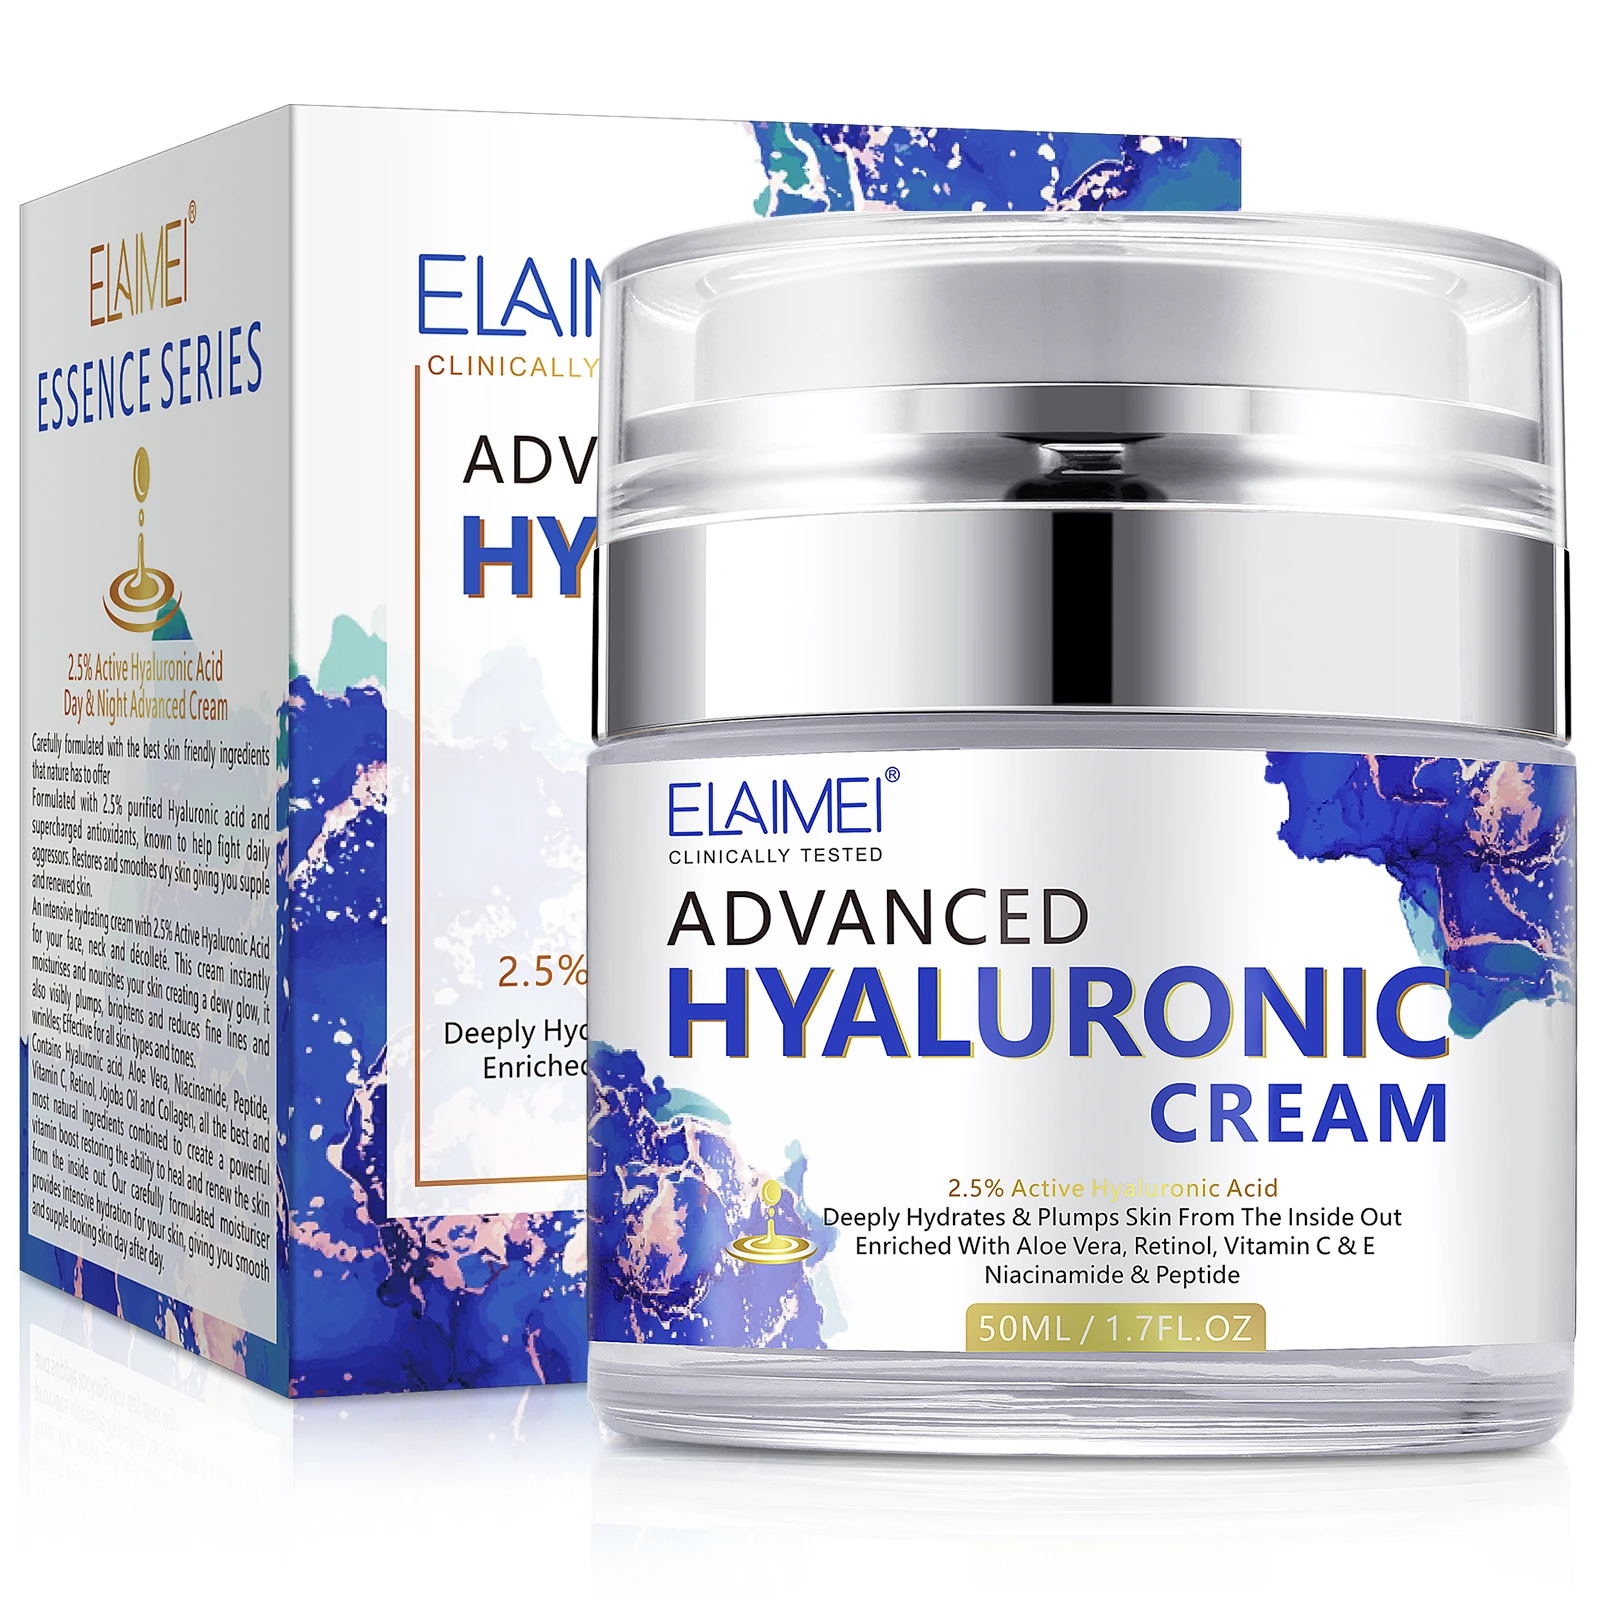 

ELAIMEI Anti Aging Remover Wrinkles Tightening Lifting Firming Face Cream Hyaluronic Acid Moisturizer Facial Cream